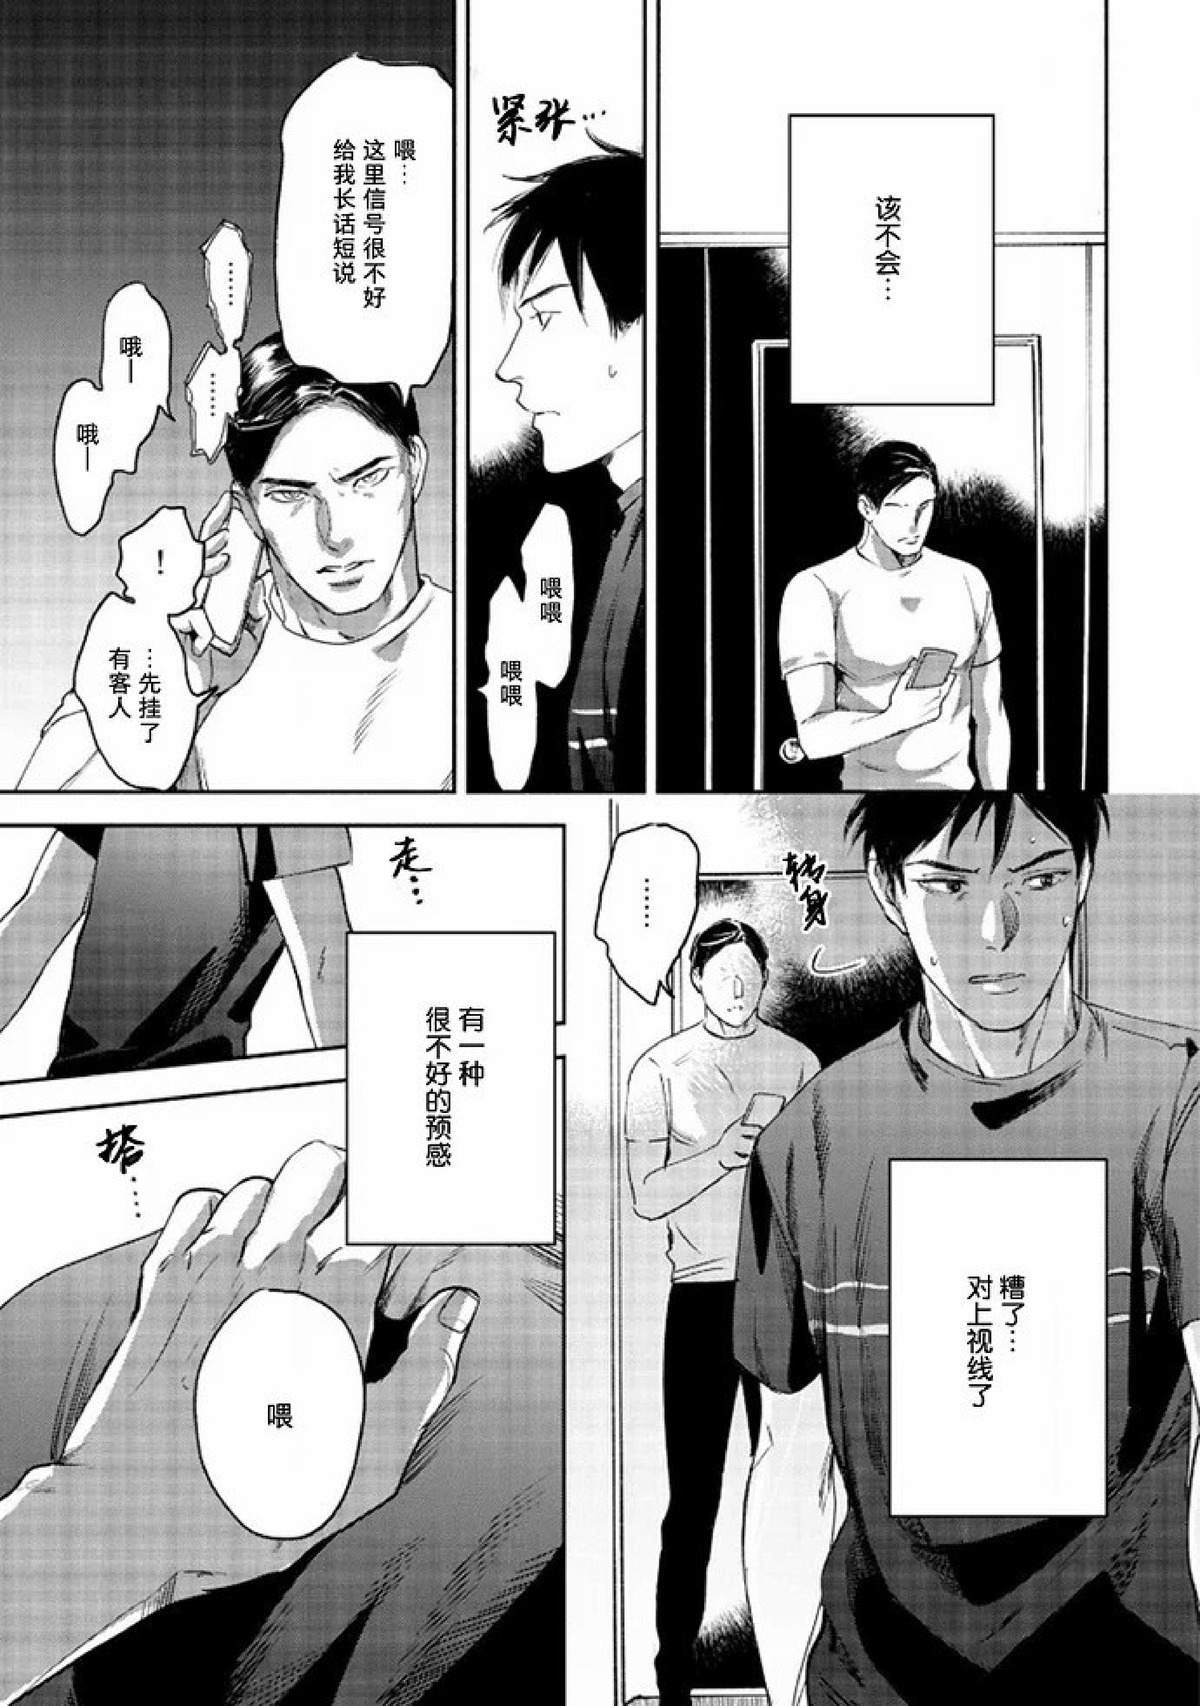 【Two sides of the same coin[腐漫]】漫画-（上卷01-02）章节漫画下拉式图片-51.jpg